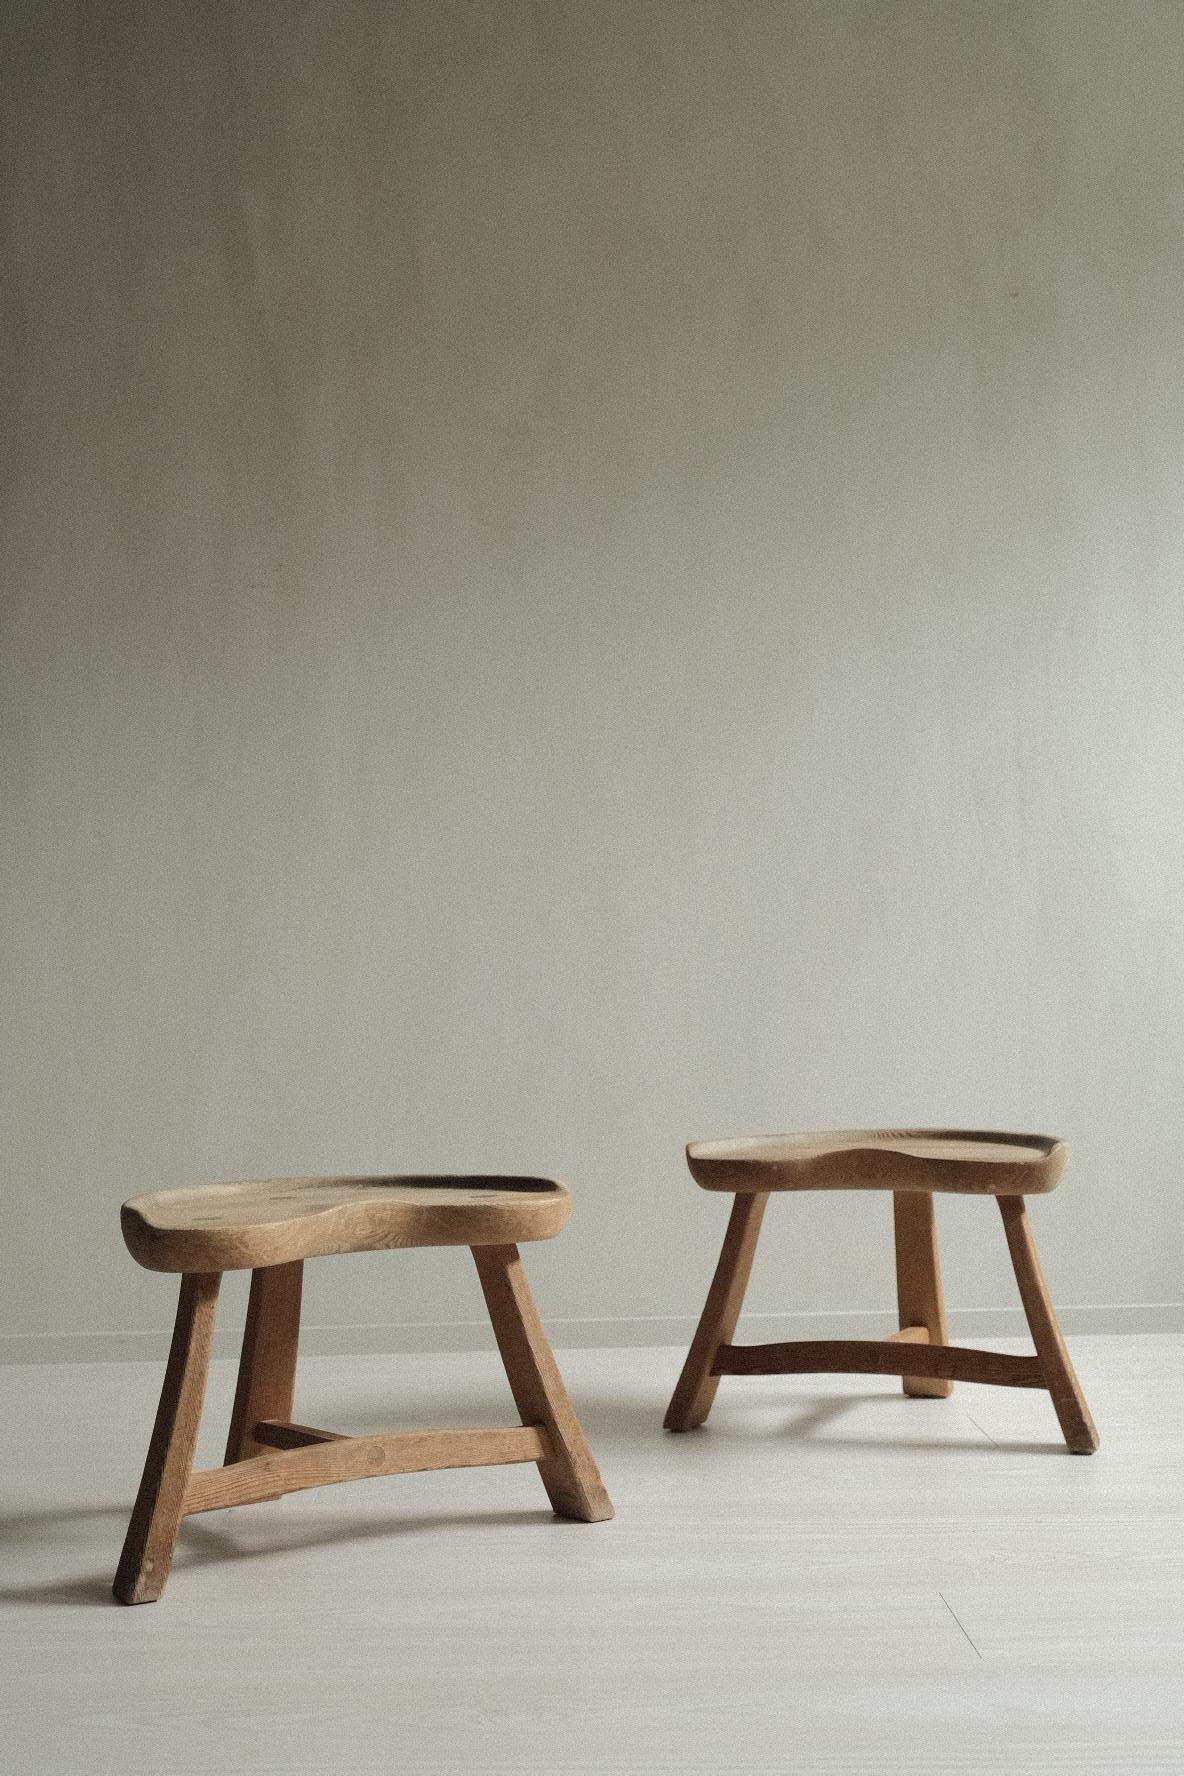 A set of two beautiful three legged pine stools, model no. 522 by Krogenæs Møbler. Designed in Norway in 1964 by the factory owner himself; Rangvald Krogenæs. This milking stool was called 